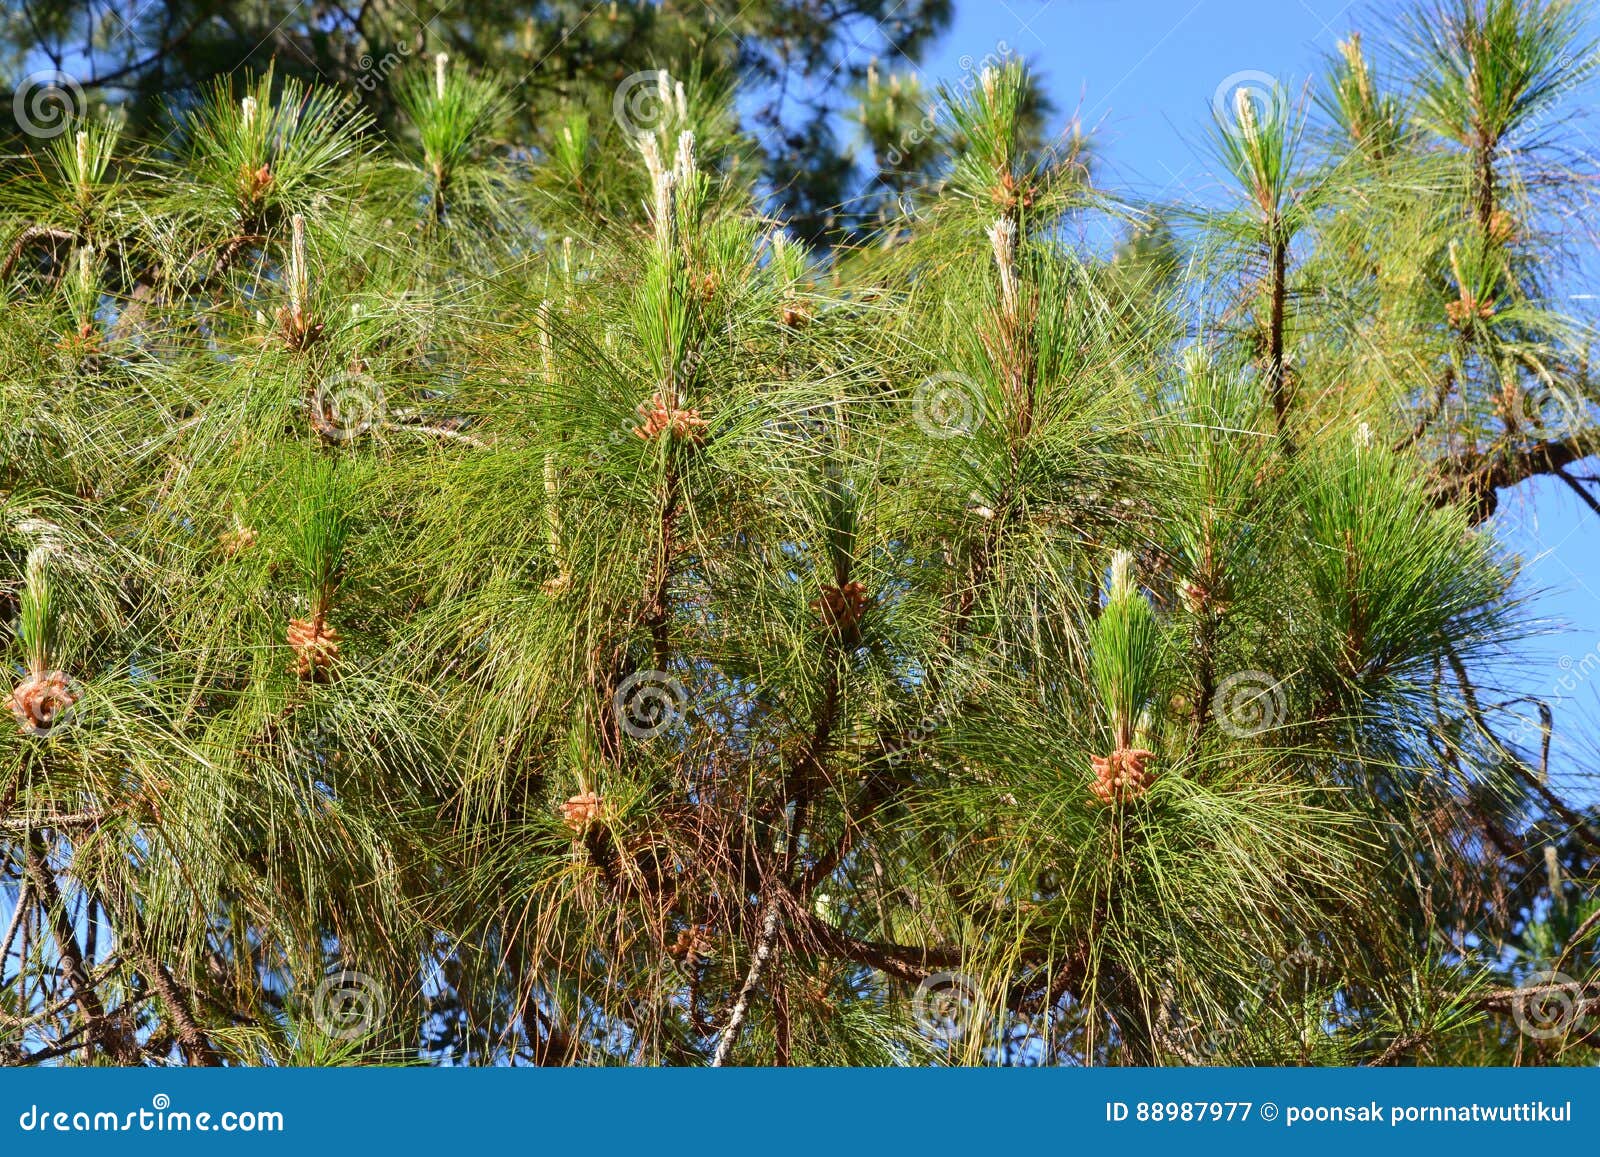 the pinaceae pine family